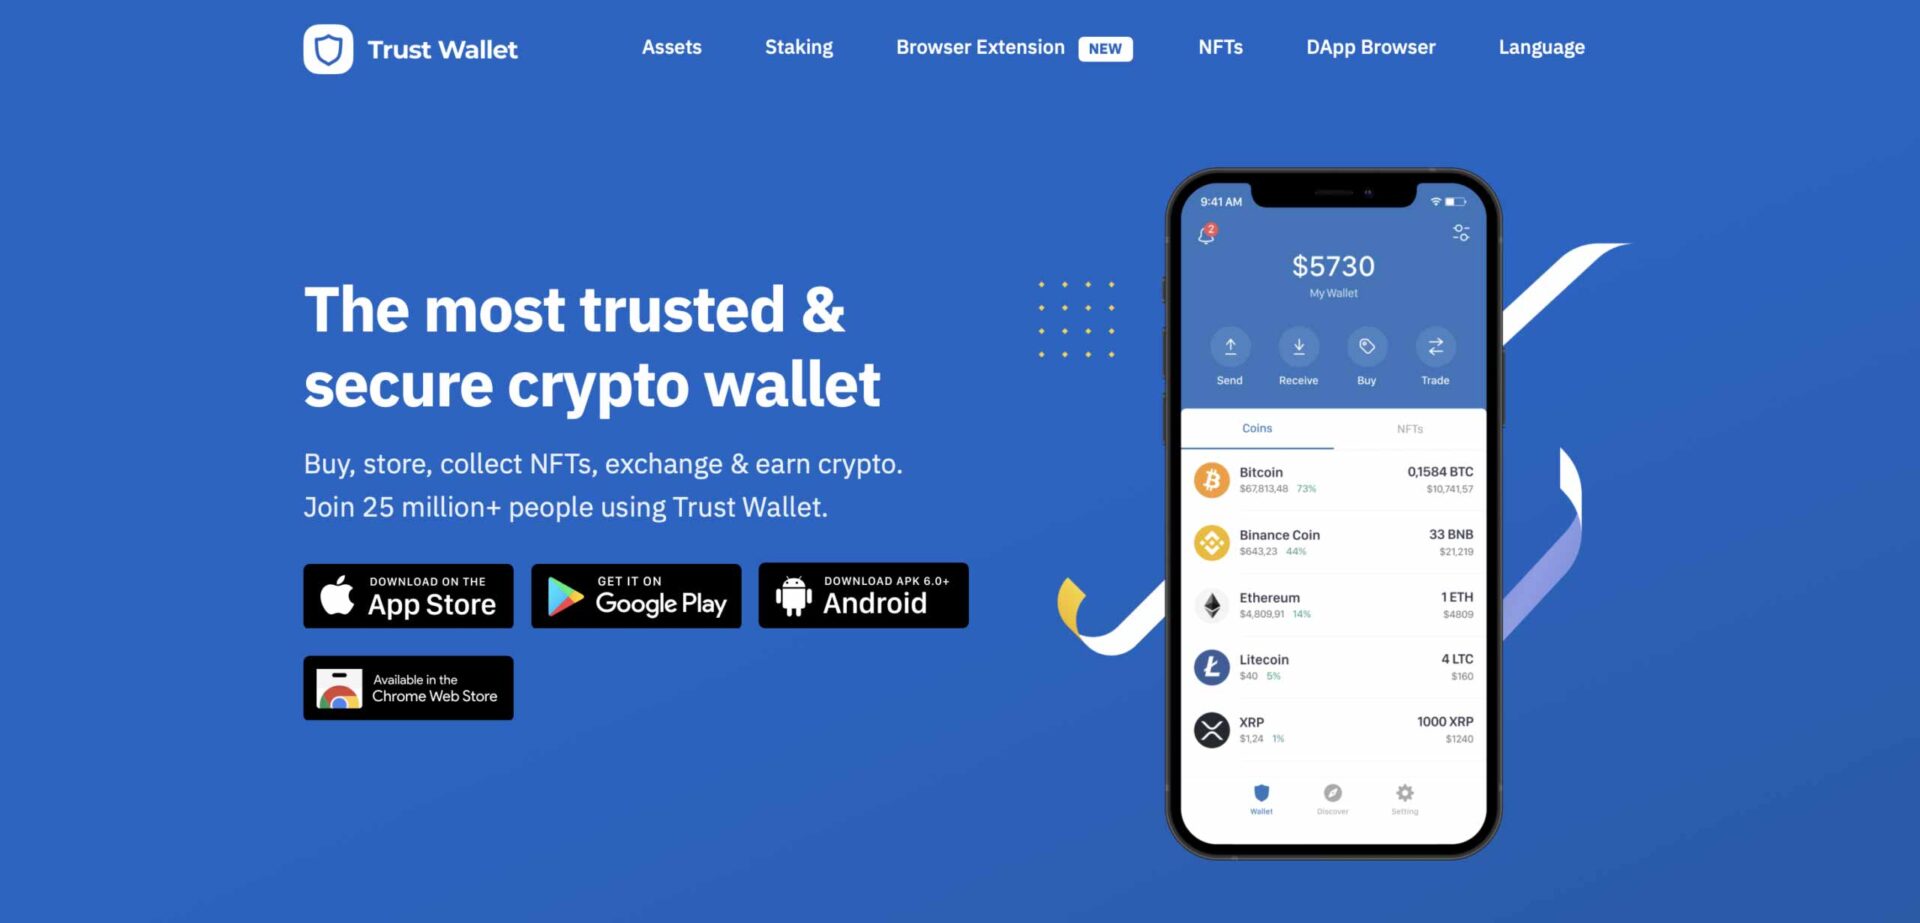 The landing page of the crypto hot wallet: Trust Wallet